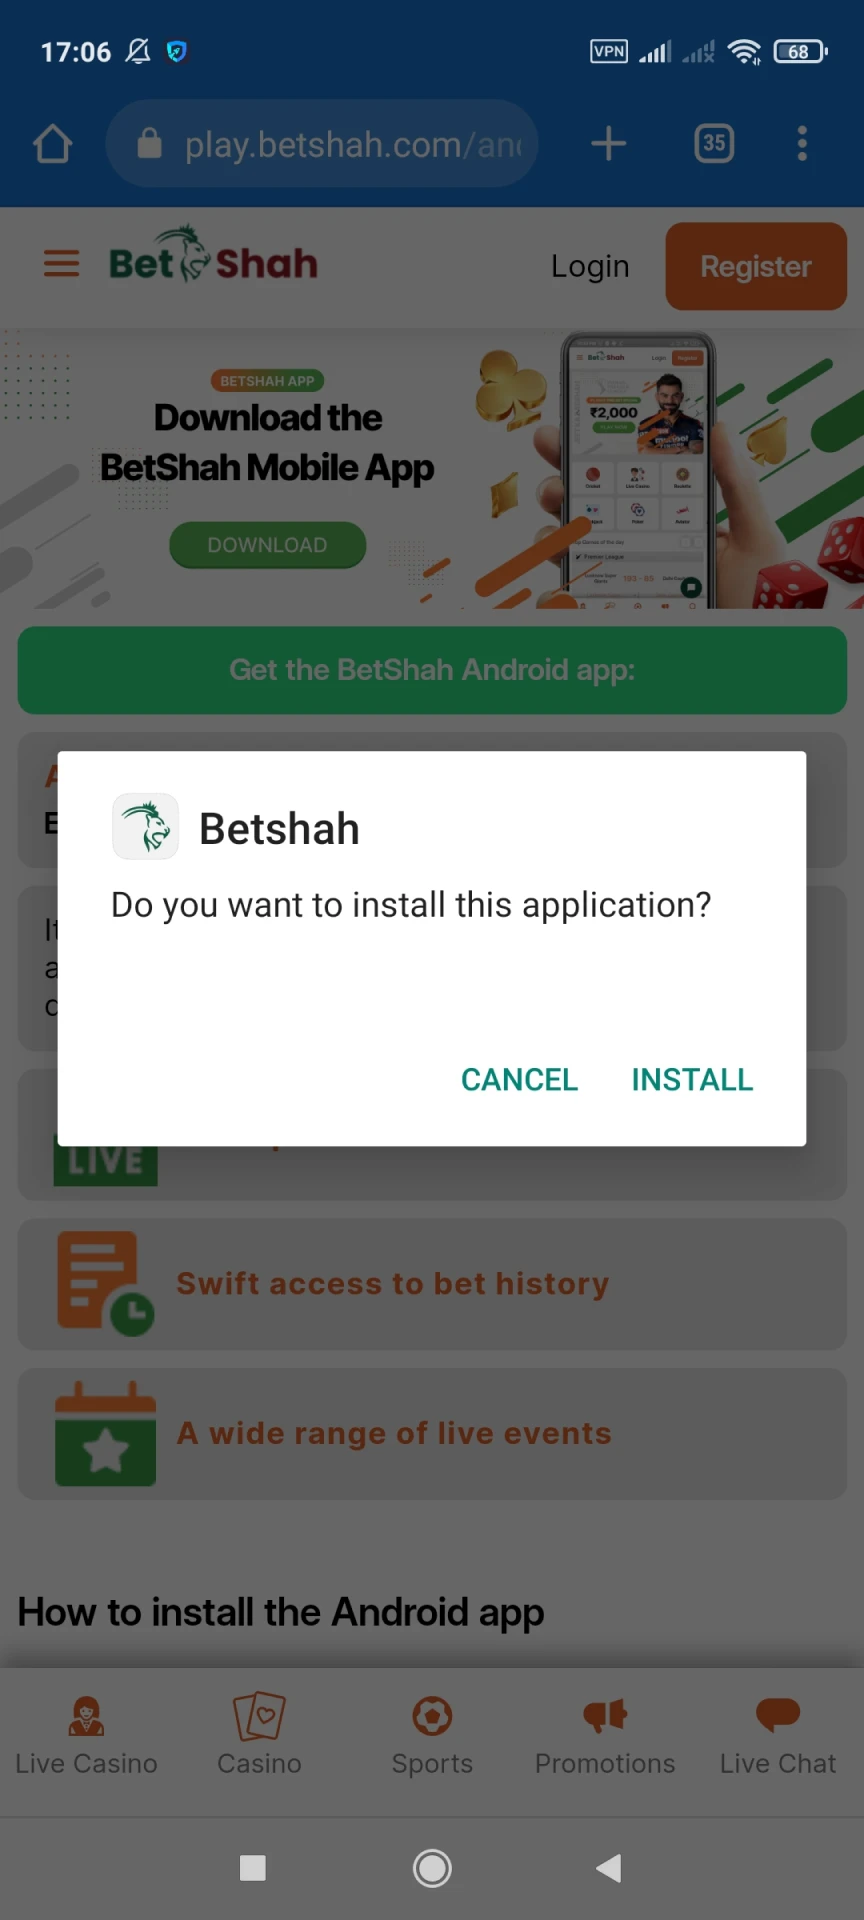 Install the BetShah app on your smartphone to play Aviator.